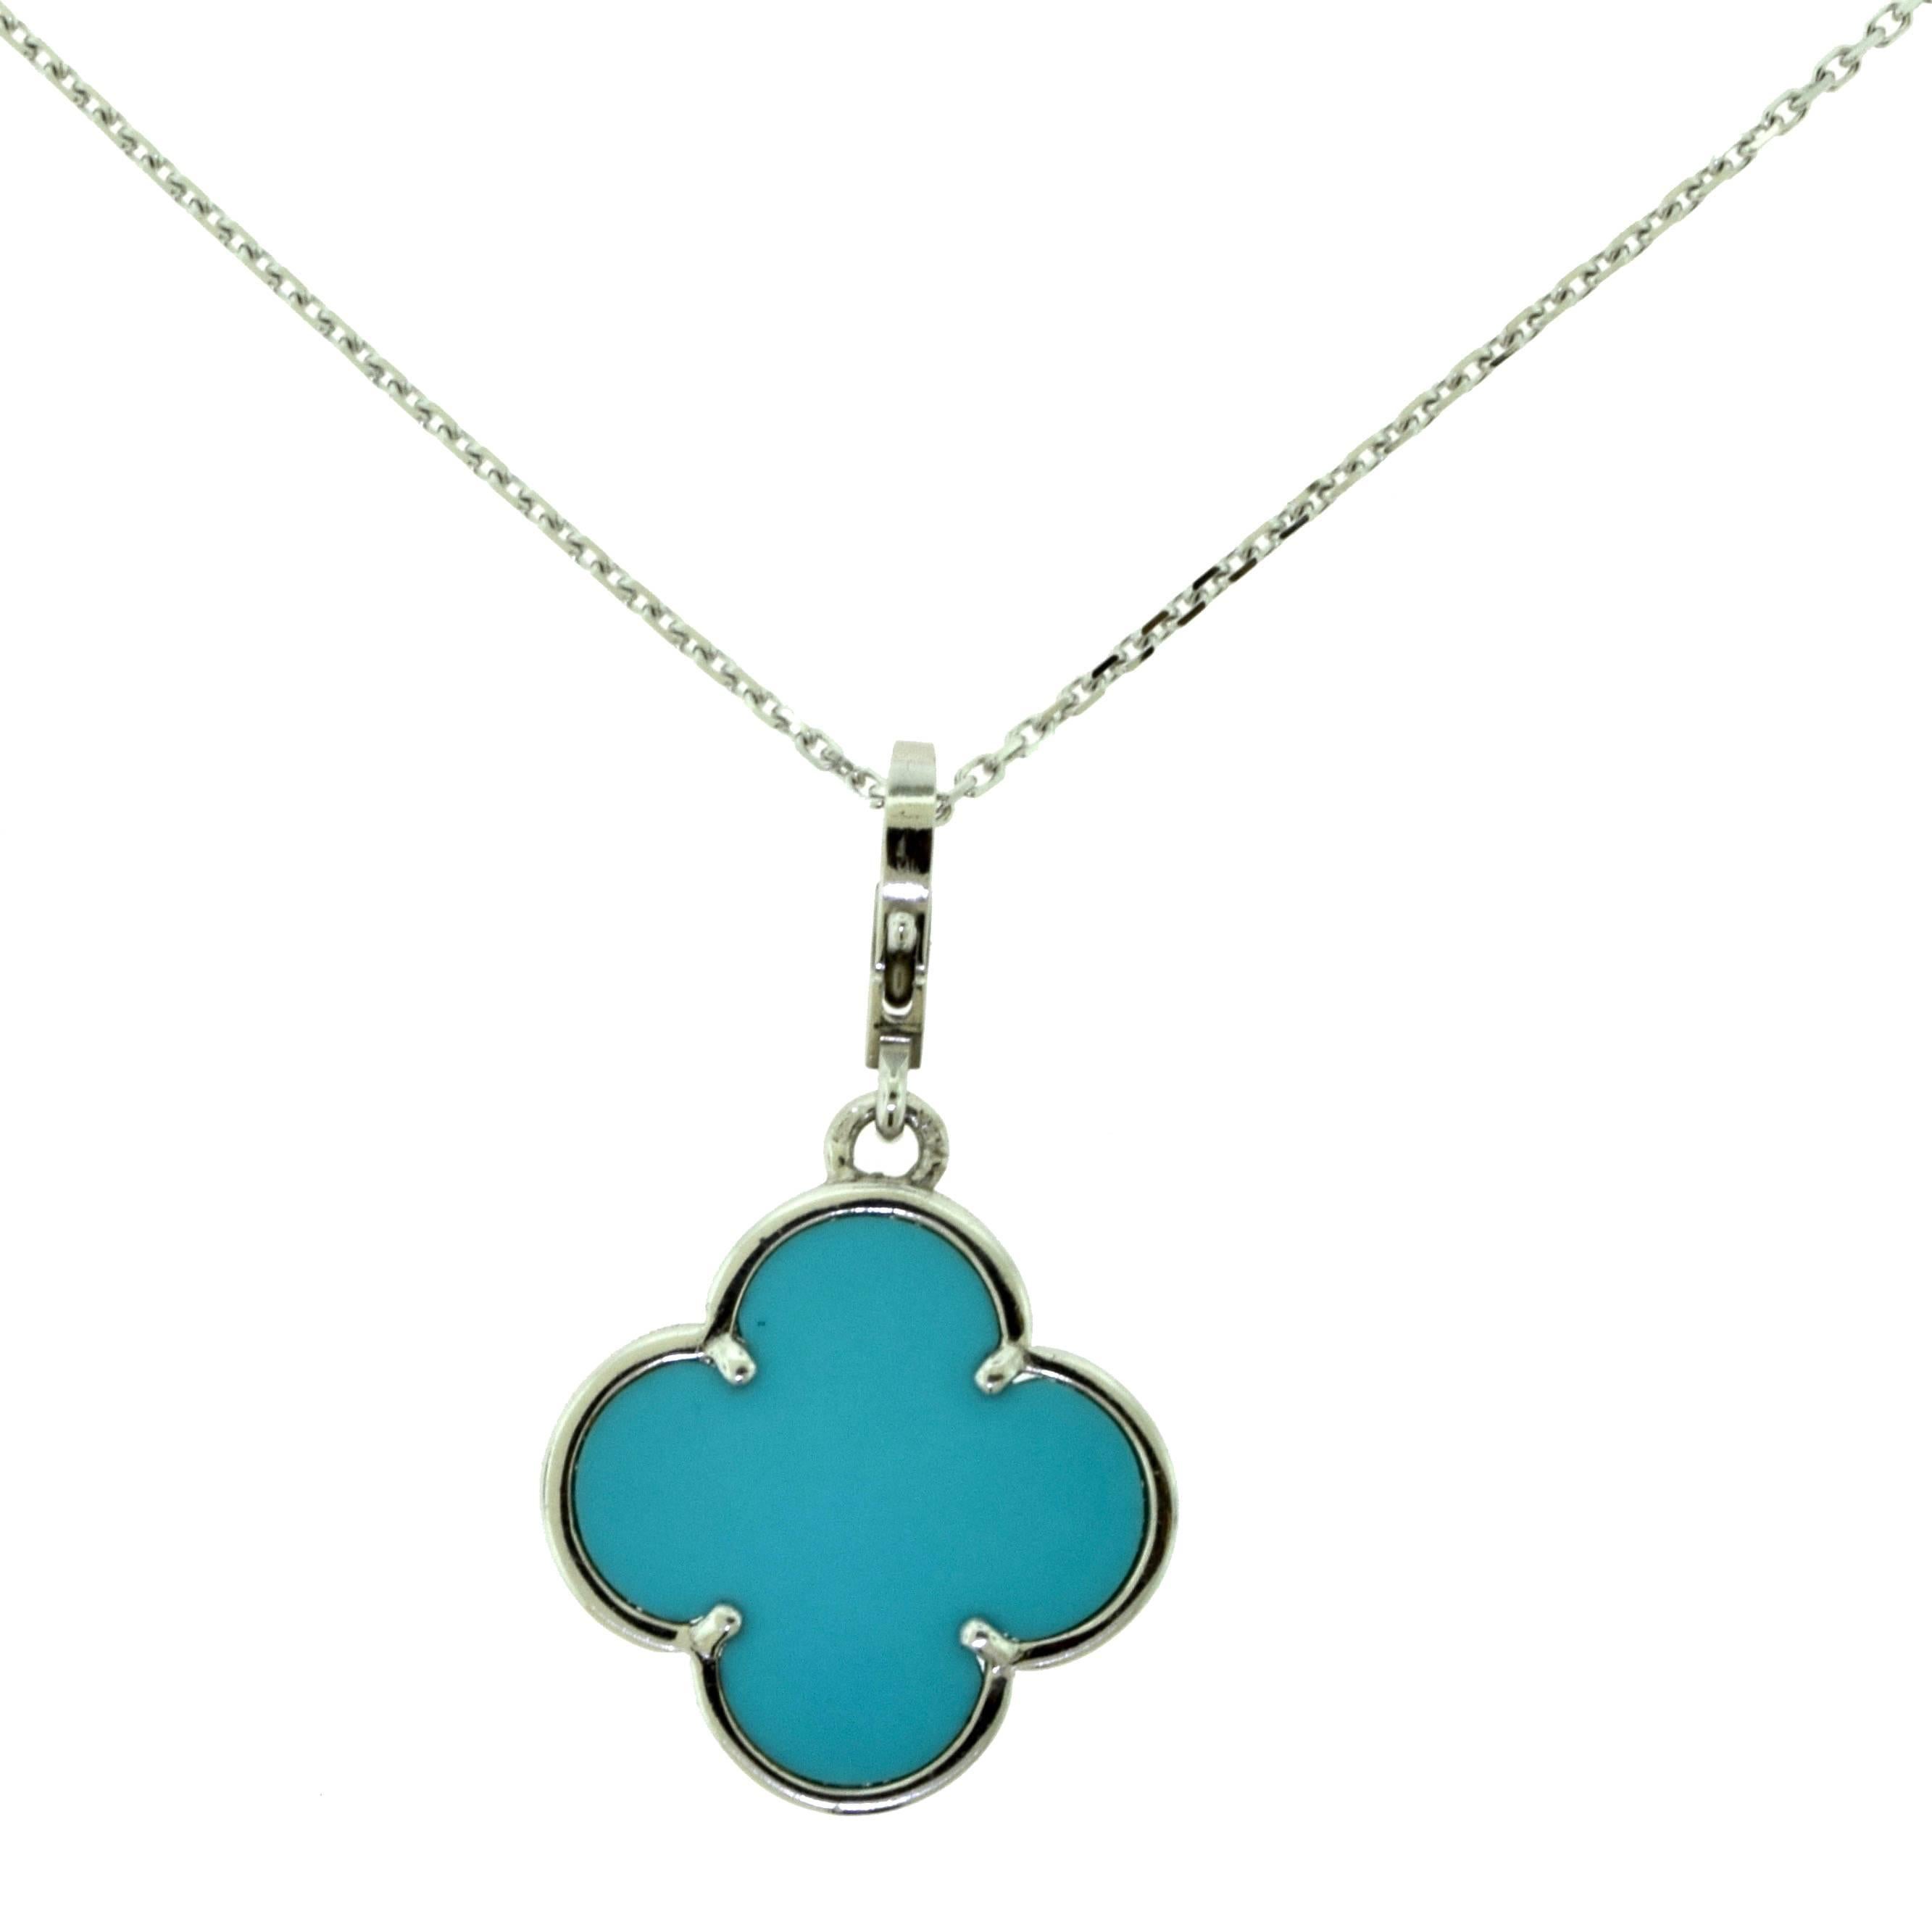 Van Cleef & Arpels Lg. Magic Alhambra Turquoise Pendant in White Gold, Chain